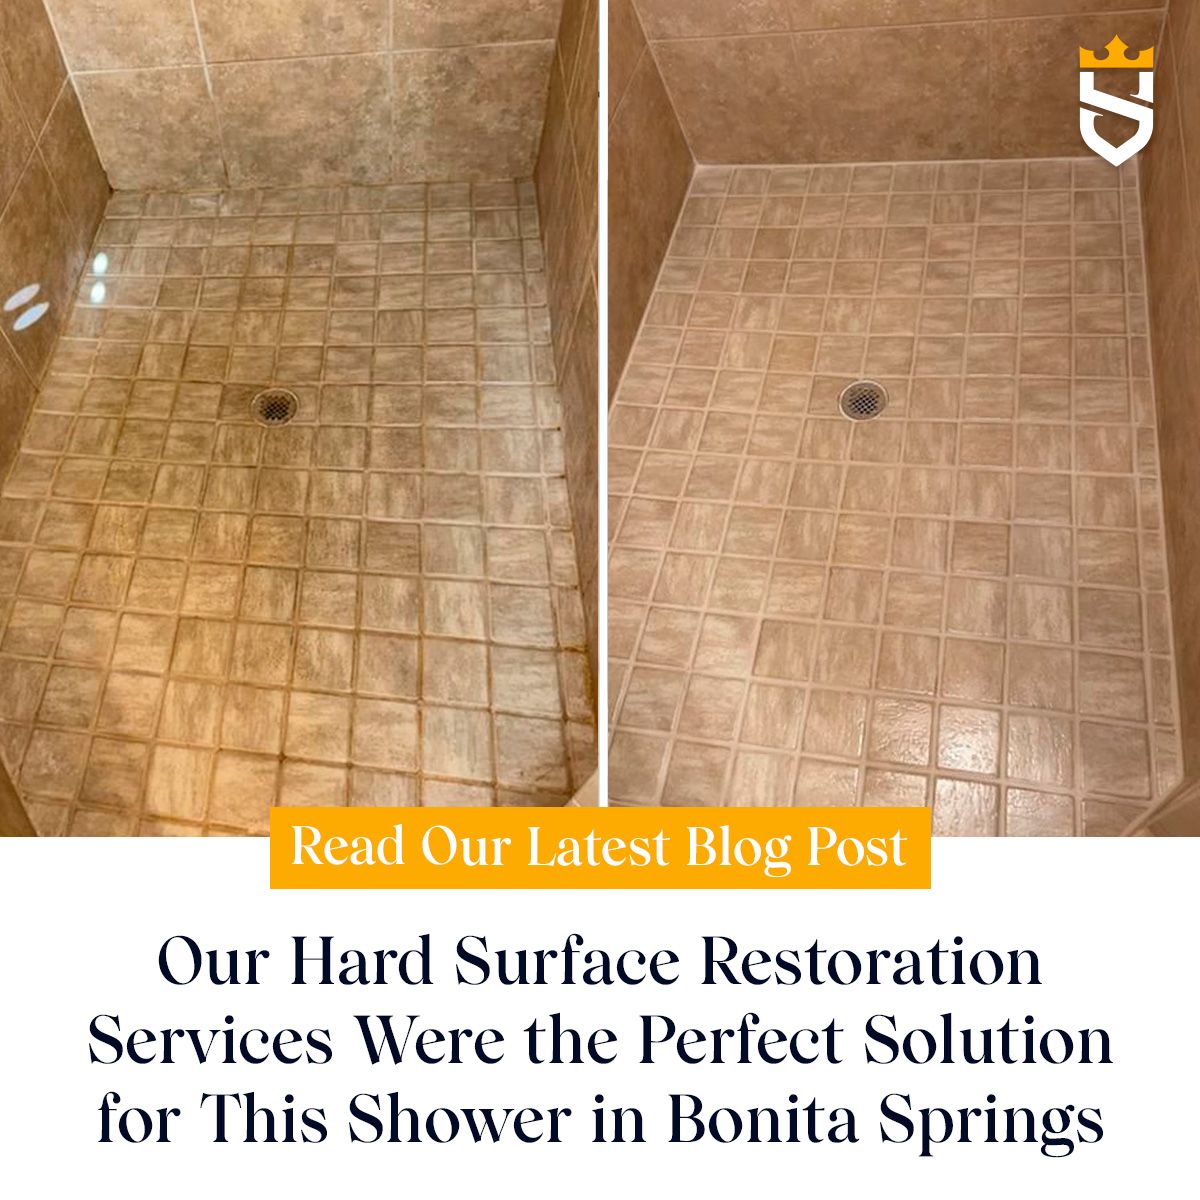 Our Hard Surface Restoration Services Were the Perfect Solution for This Shower in Bonita Springs